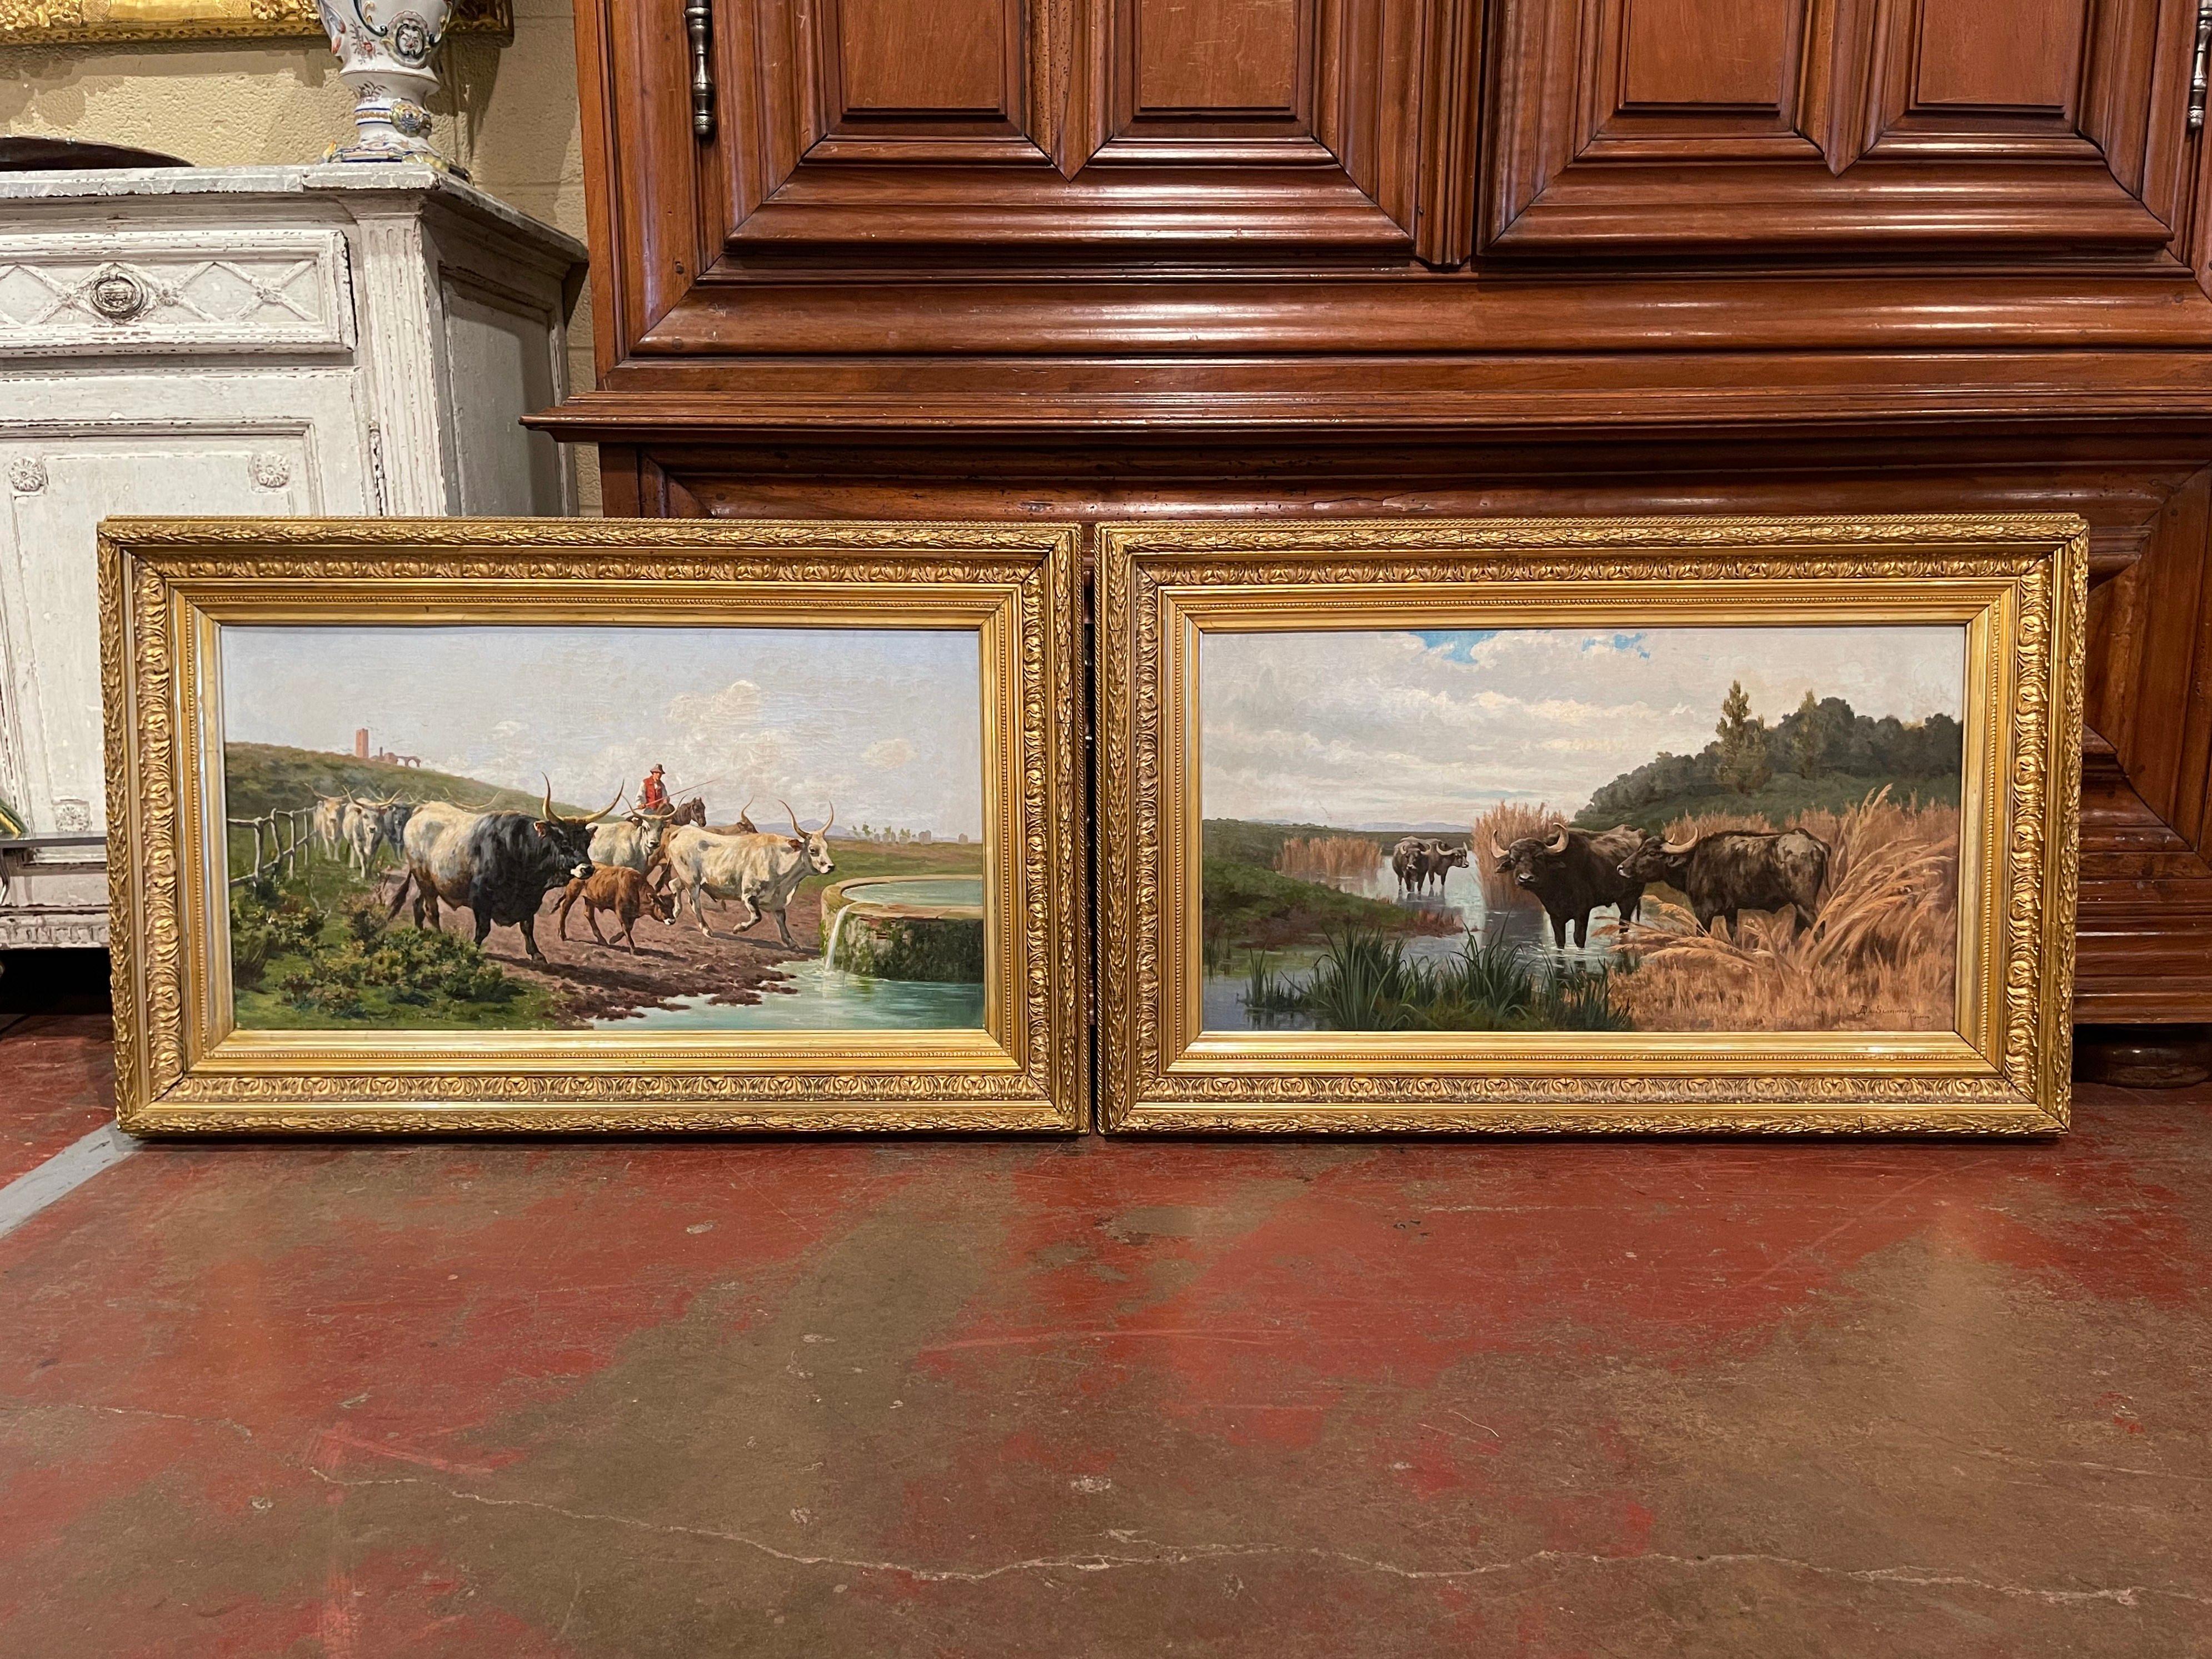 Decorate a den, study or office with this elegant pair of antique paintings. Painted in Rome, Italy, and signed by the artist, A. de Simoni, and set in the original carved gilt wood frame, each painting depicts a landscape scene with herdsman